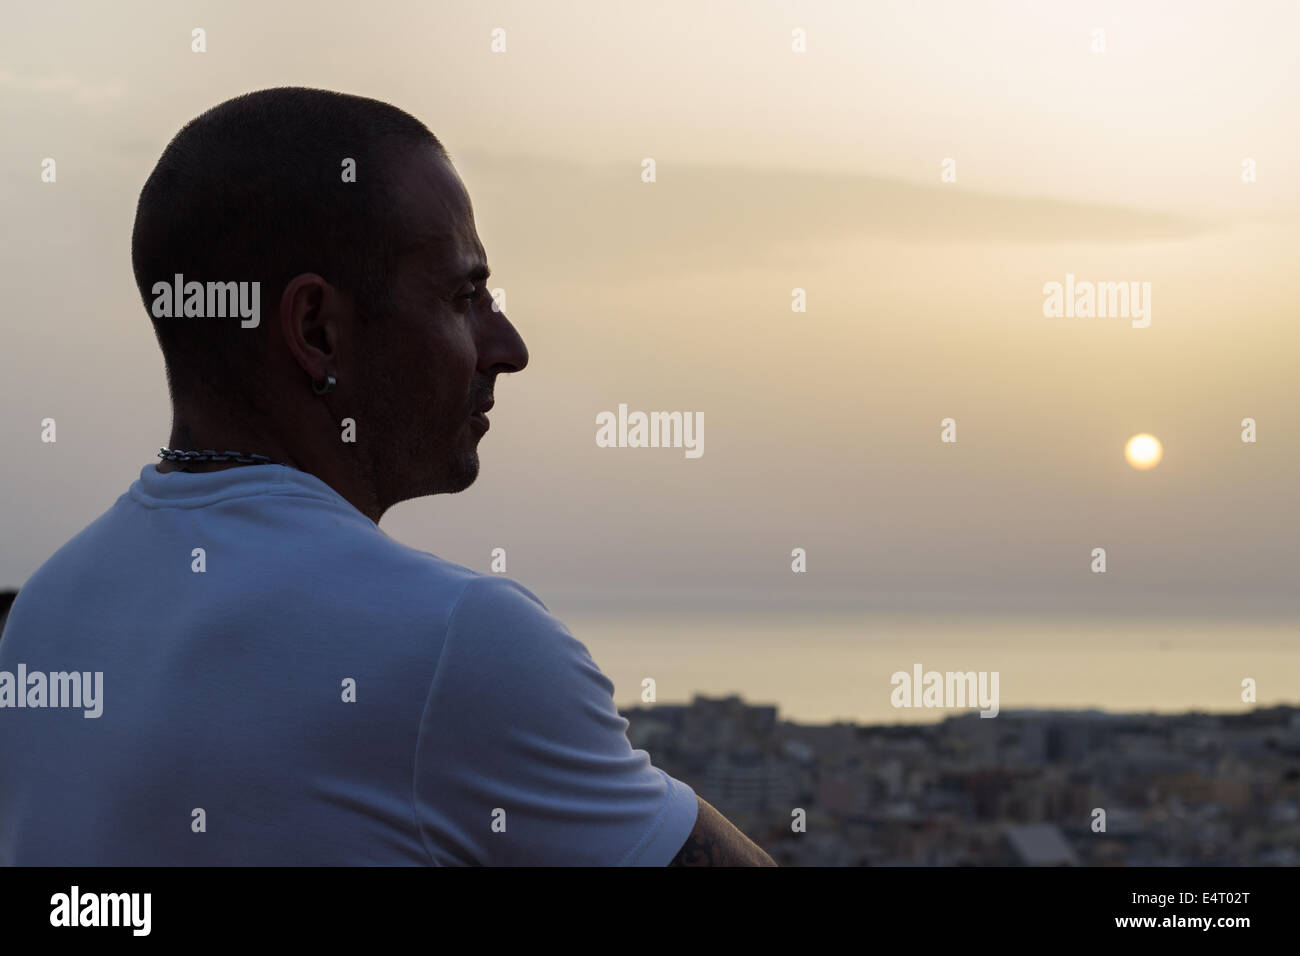 man silhouette sunset sun face portrait outdoors relaxing Stock Photo